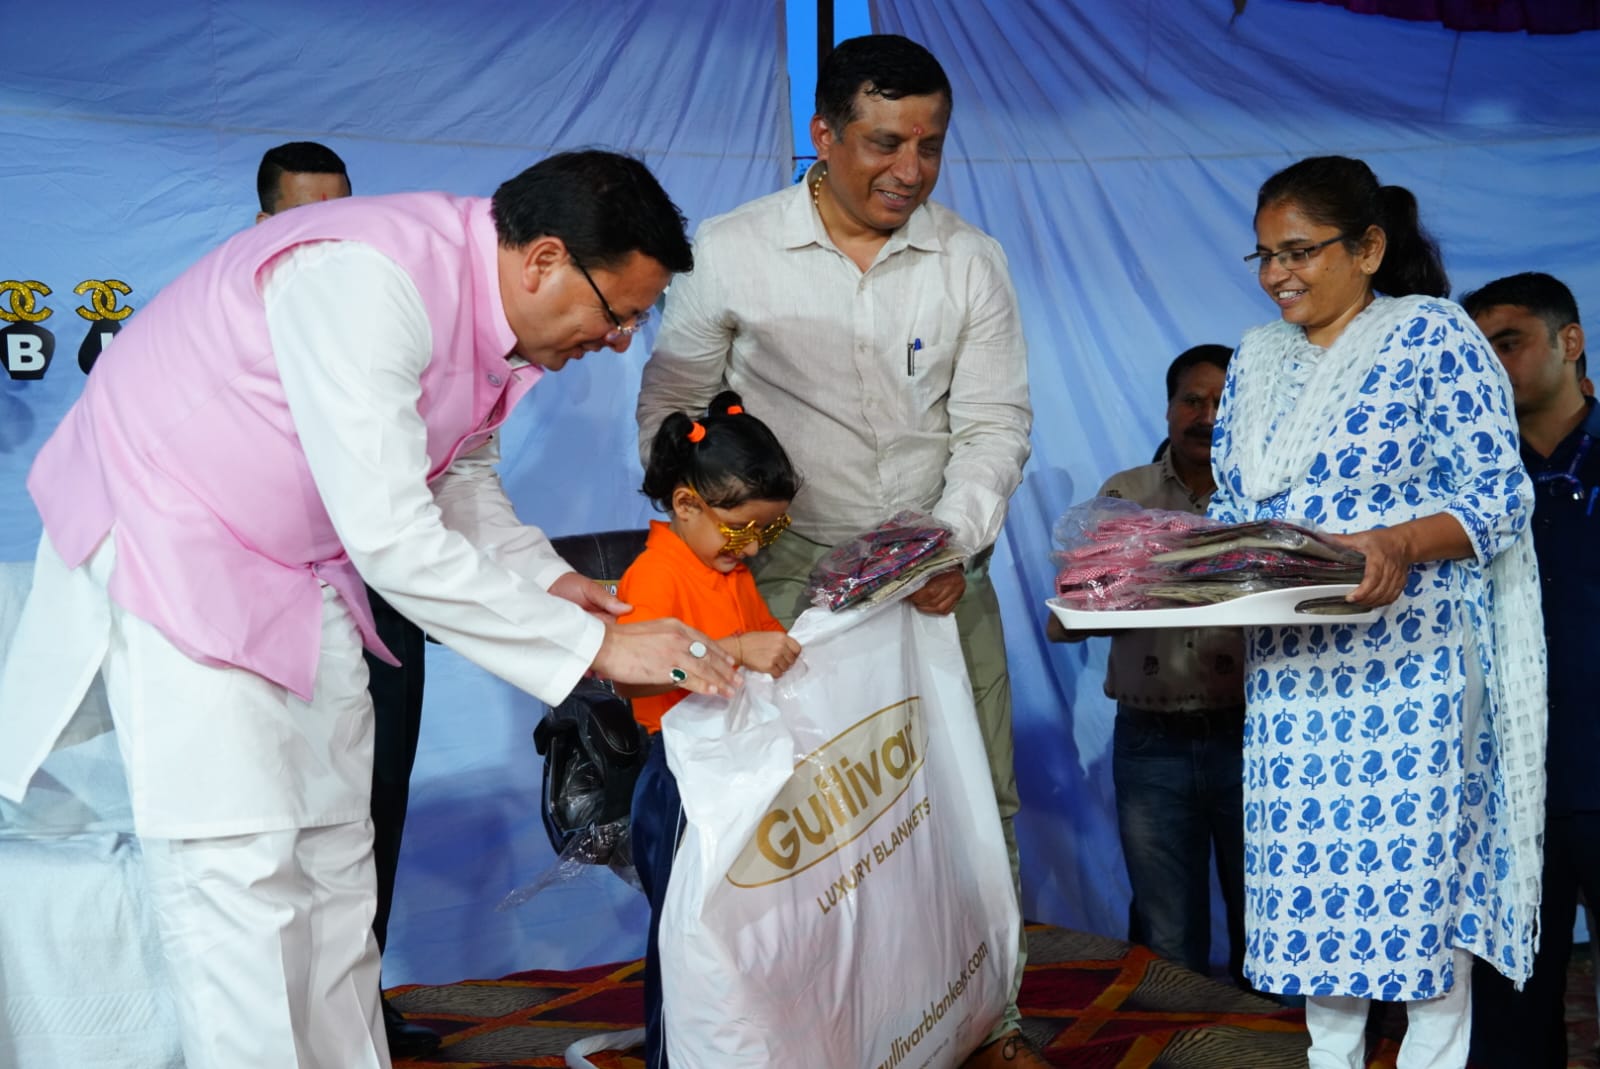 CM gave gifts to destitute and poor children on the eve of his birthday